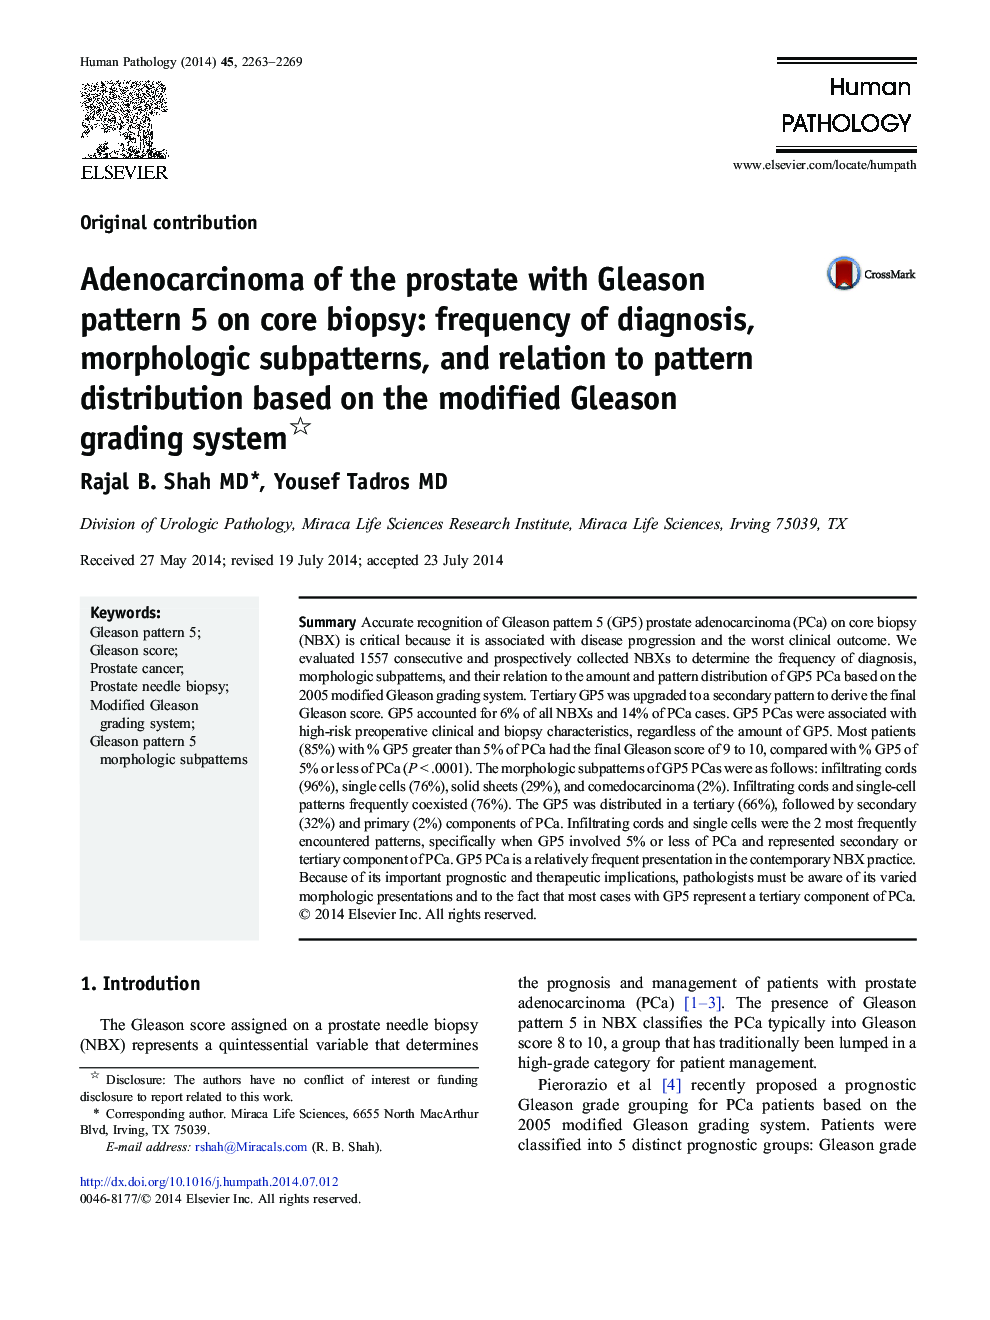 Adenocarcinoma of the prostate with Gleason pattern 5 on core biopsy: frequency of diagnosis, morphologic subpatterns, and relation to pattern distribution based on the modified Gleason grading system 